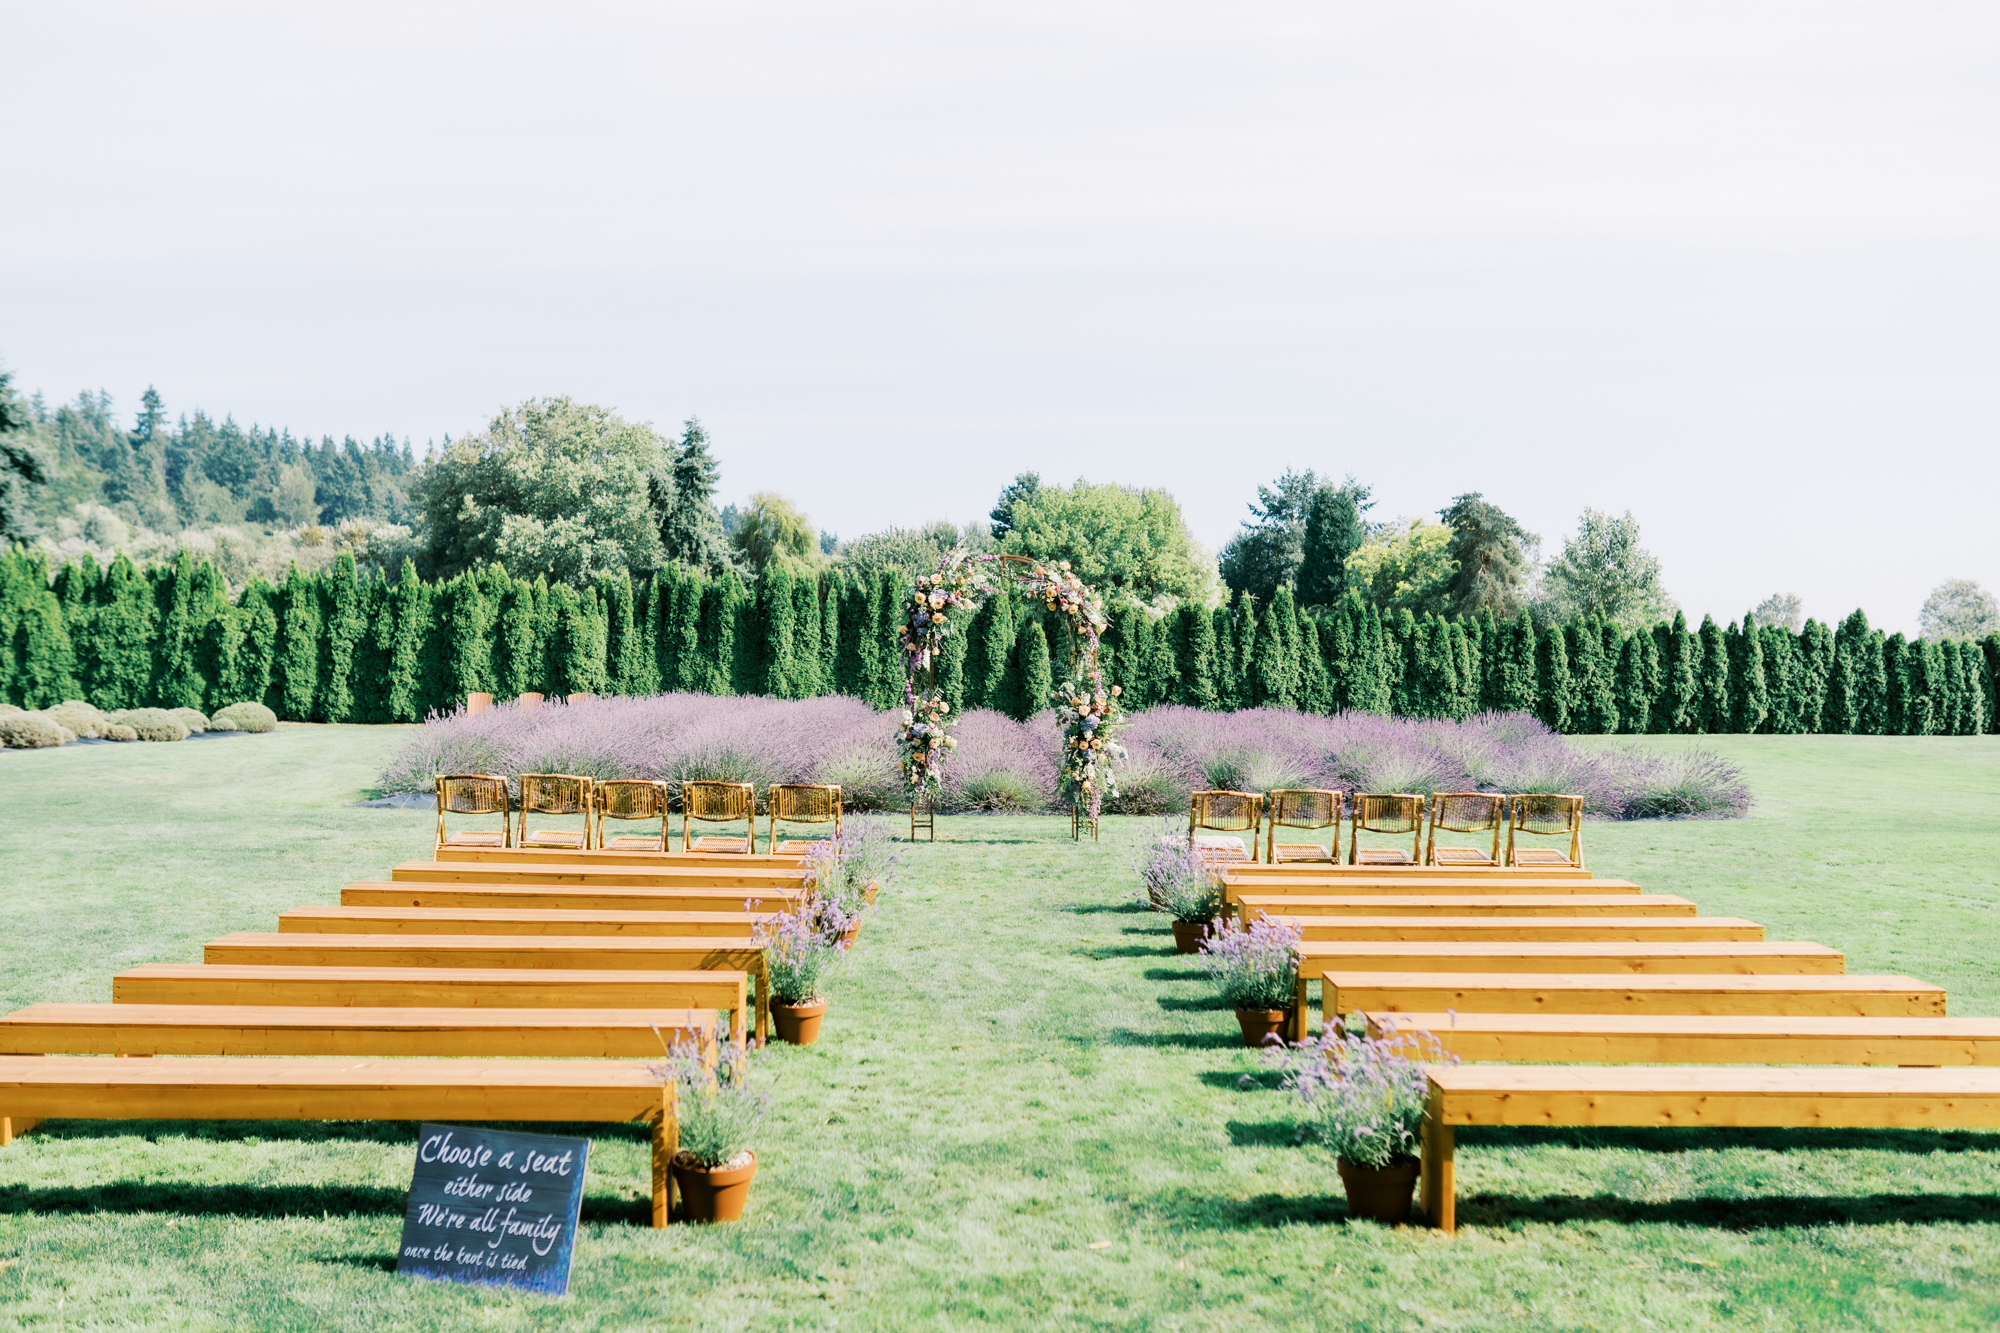 Woodinville Lavender Farm weddings: Lindsay and Andres wedding ceremony